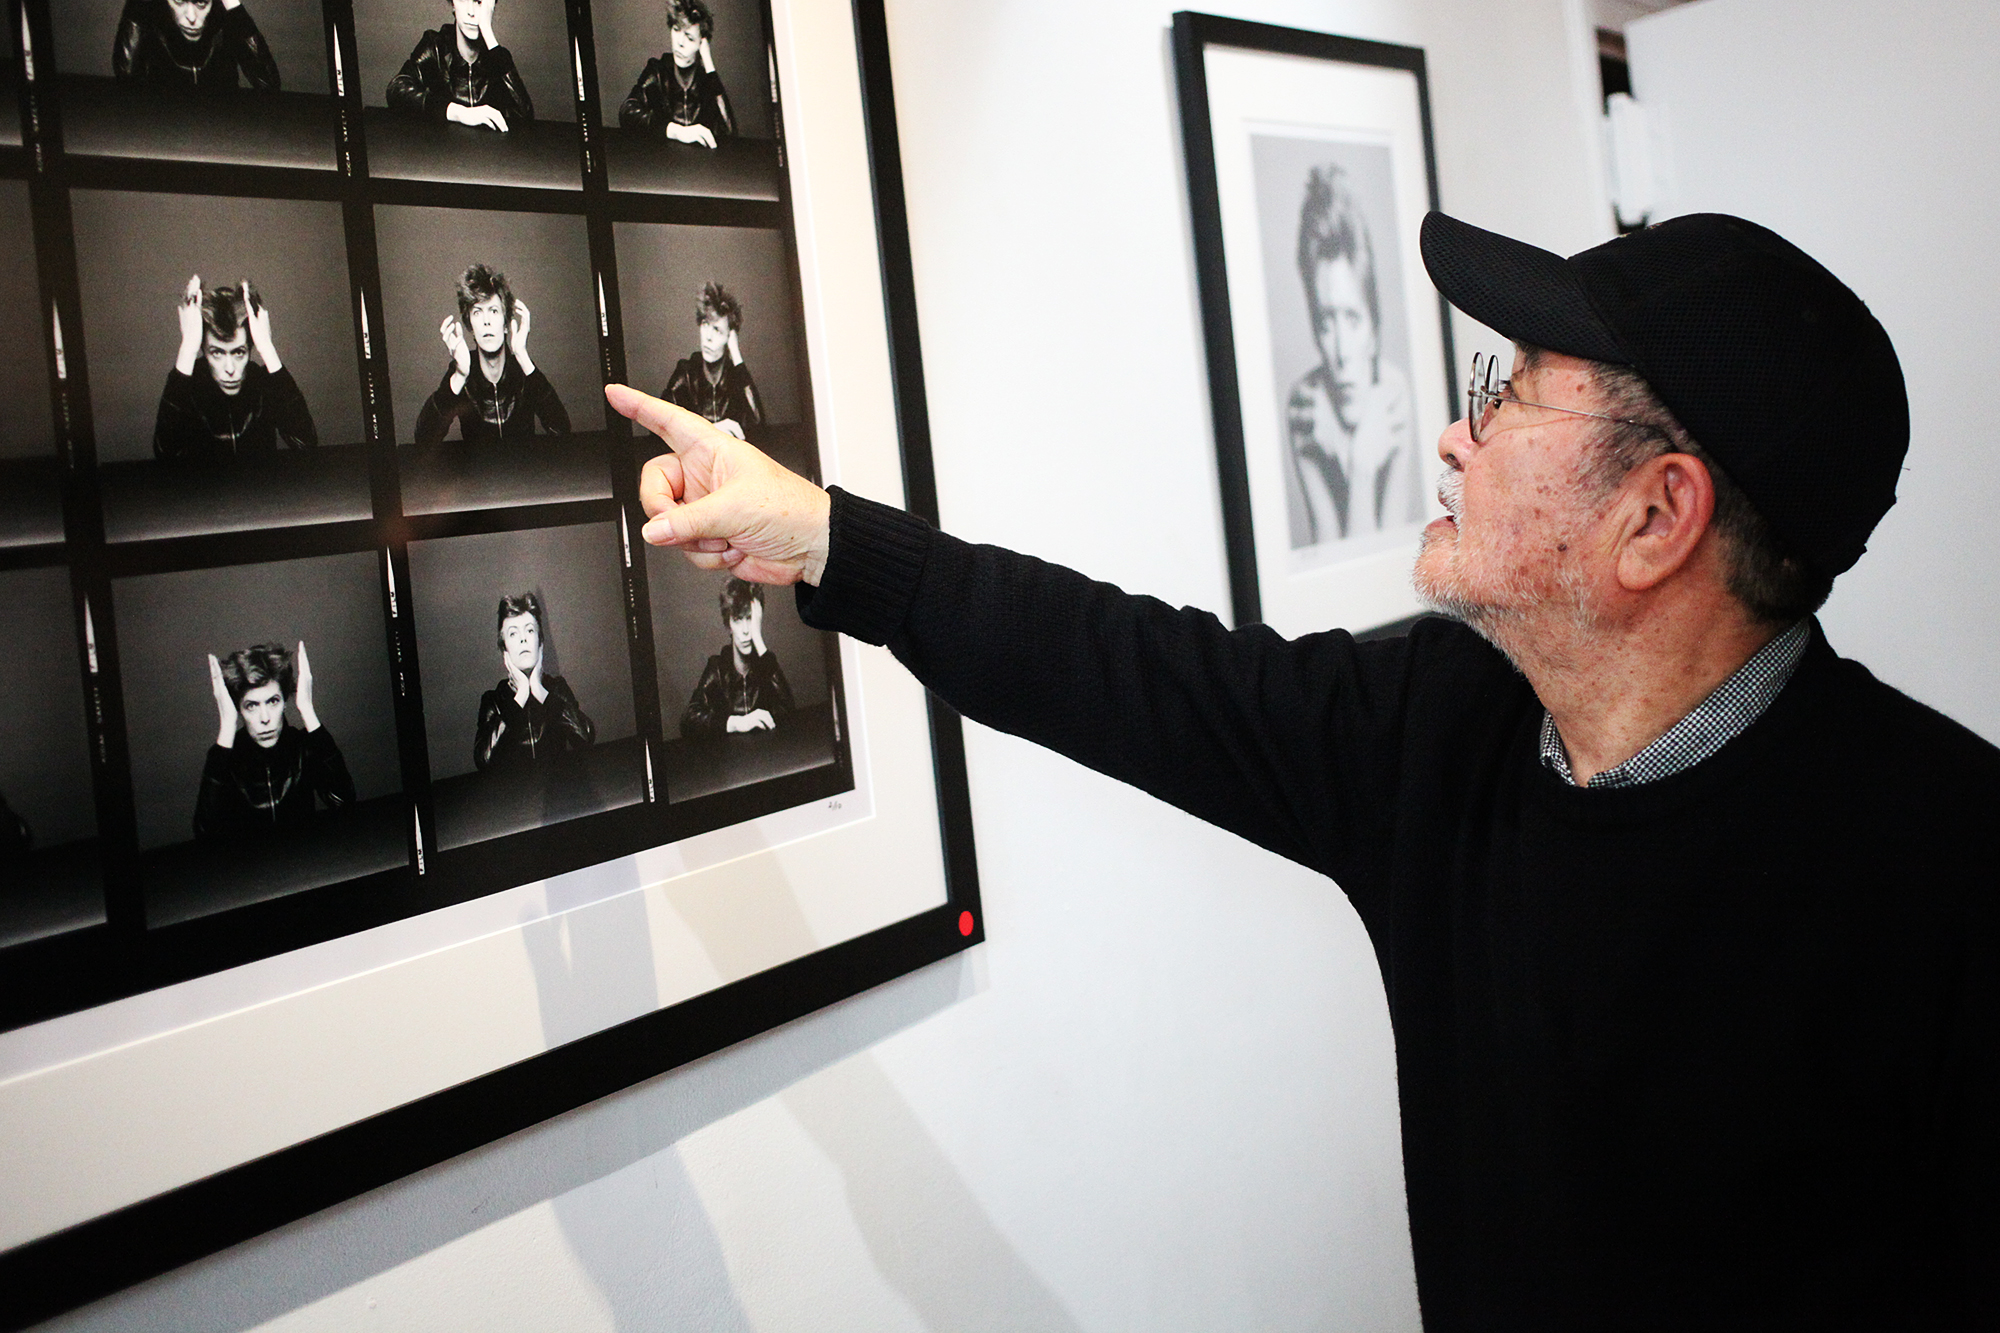 Masayoshi Sukita points out his favorite image from his shoot with David Bowie for the Heroes album cover at the Morrison Hotel Gallery in New York City on Nov. 13, 2015.